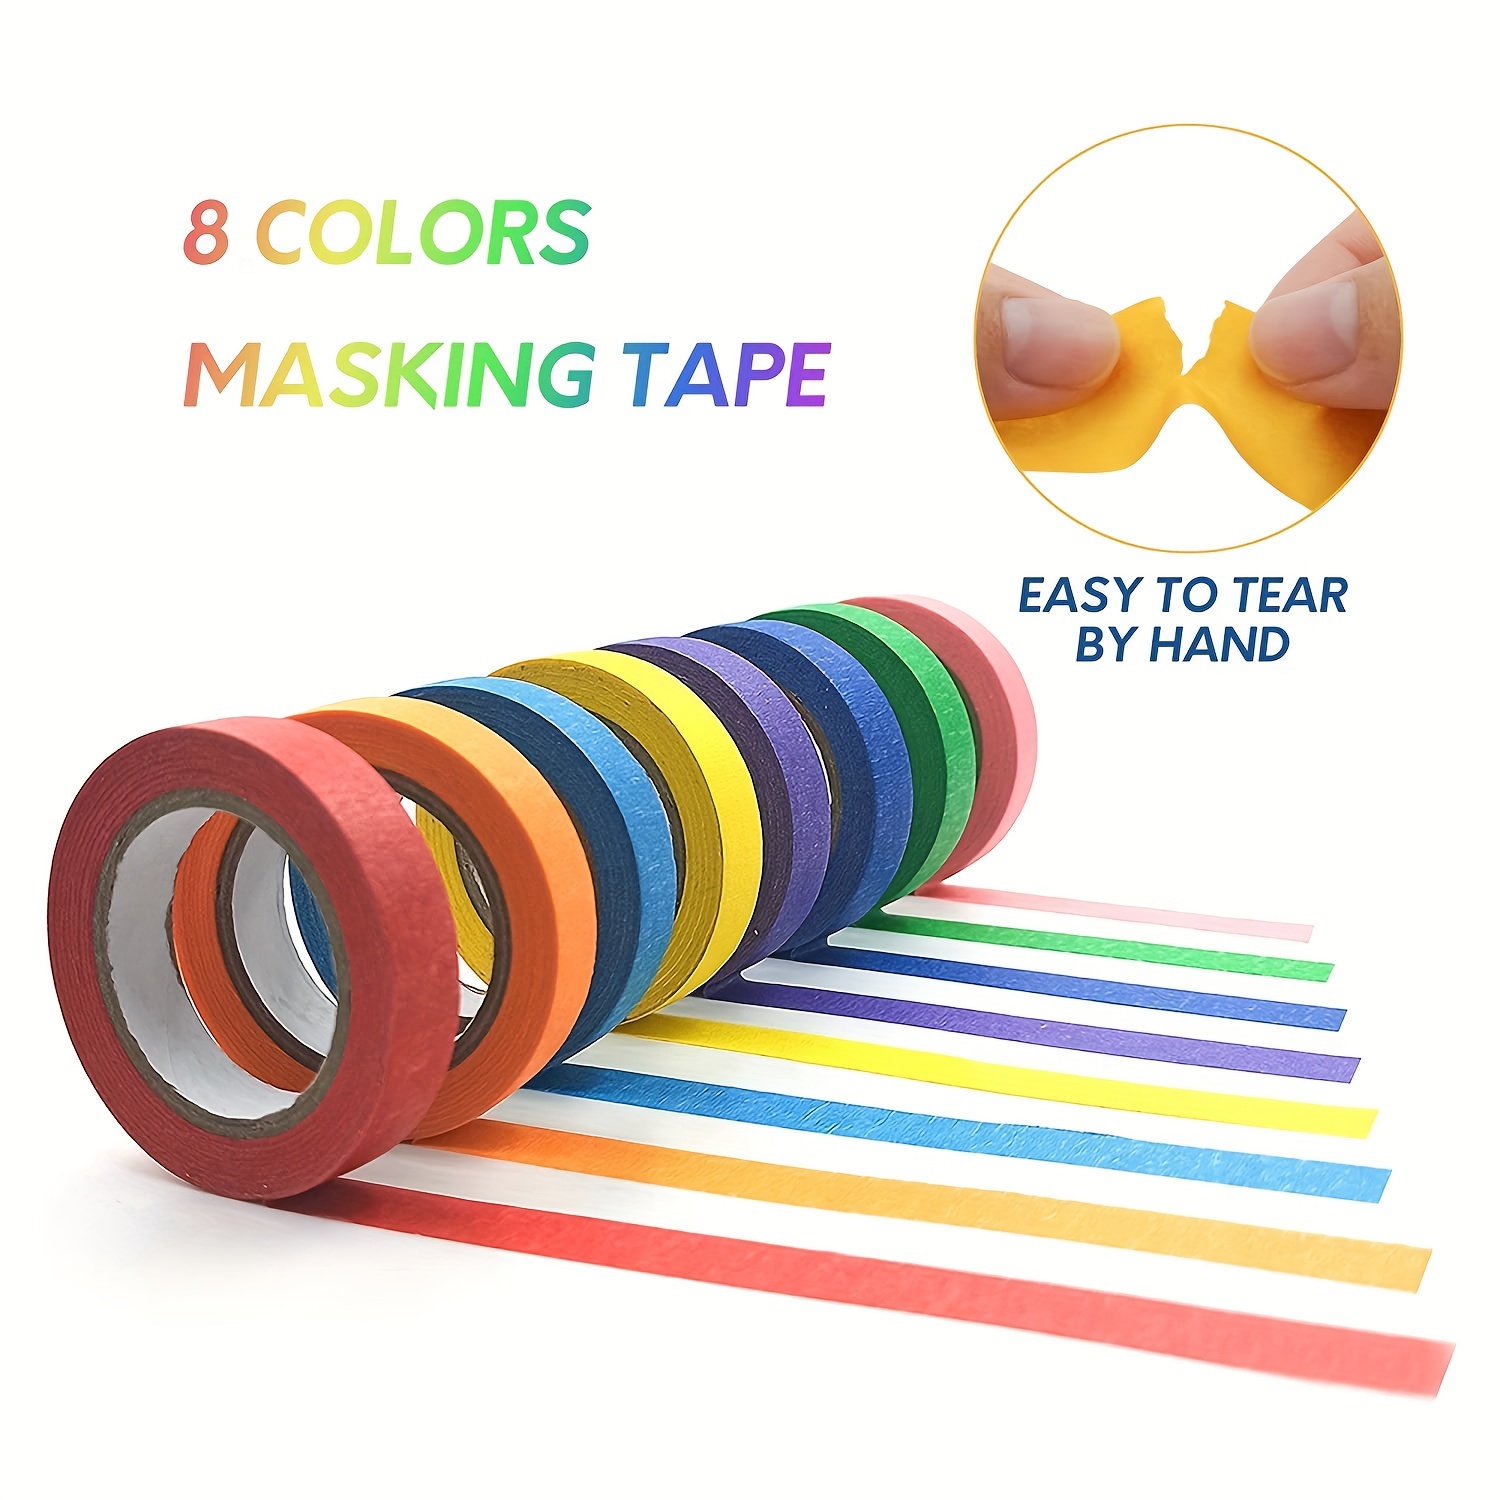  Colored Masking Tape Rolls Craft Paper Tape Teacher Tape for  Art Lab Labeling Classroom Decorations & Teaching Supply Craft Paper Tape